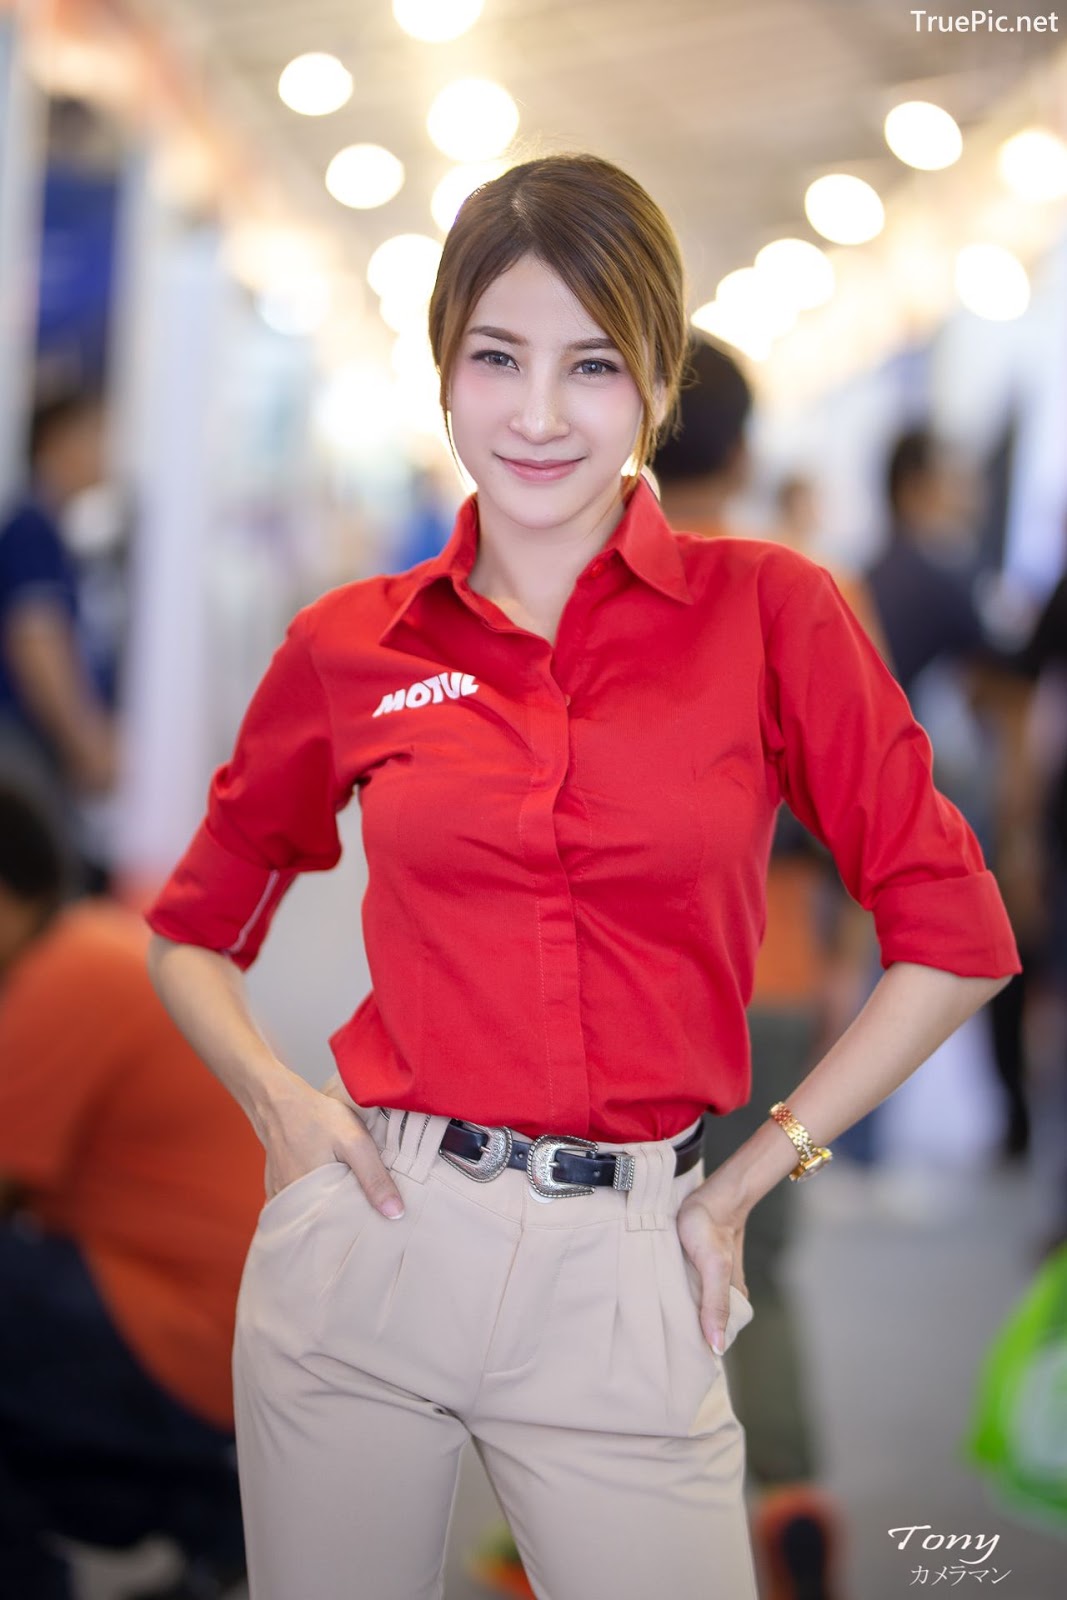 Image-Thailand-Hot-Model-Thai-Racing-Girl-At-Motor-Show-2019-TruePic.net- Picture-71